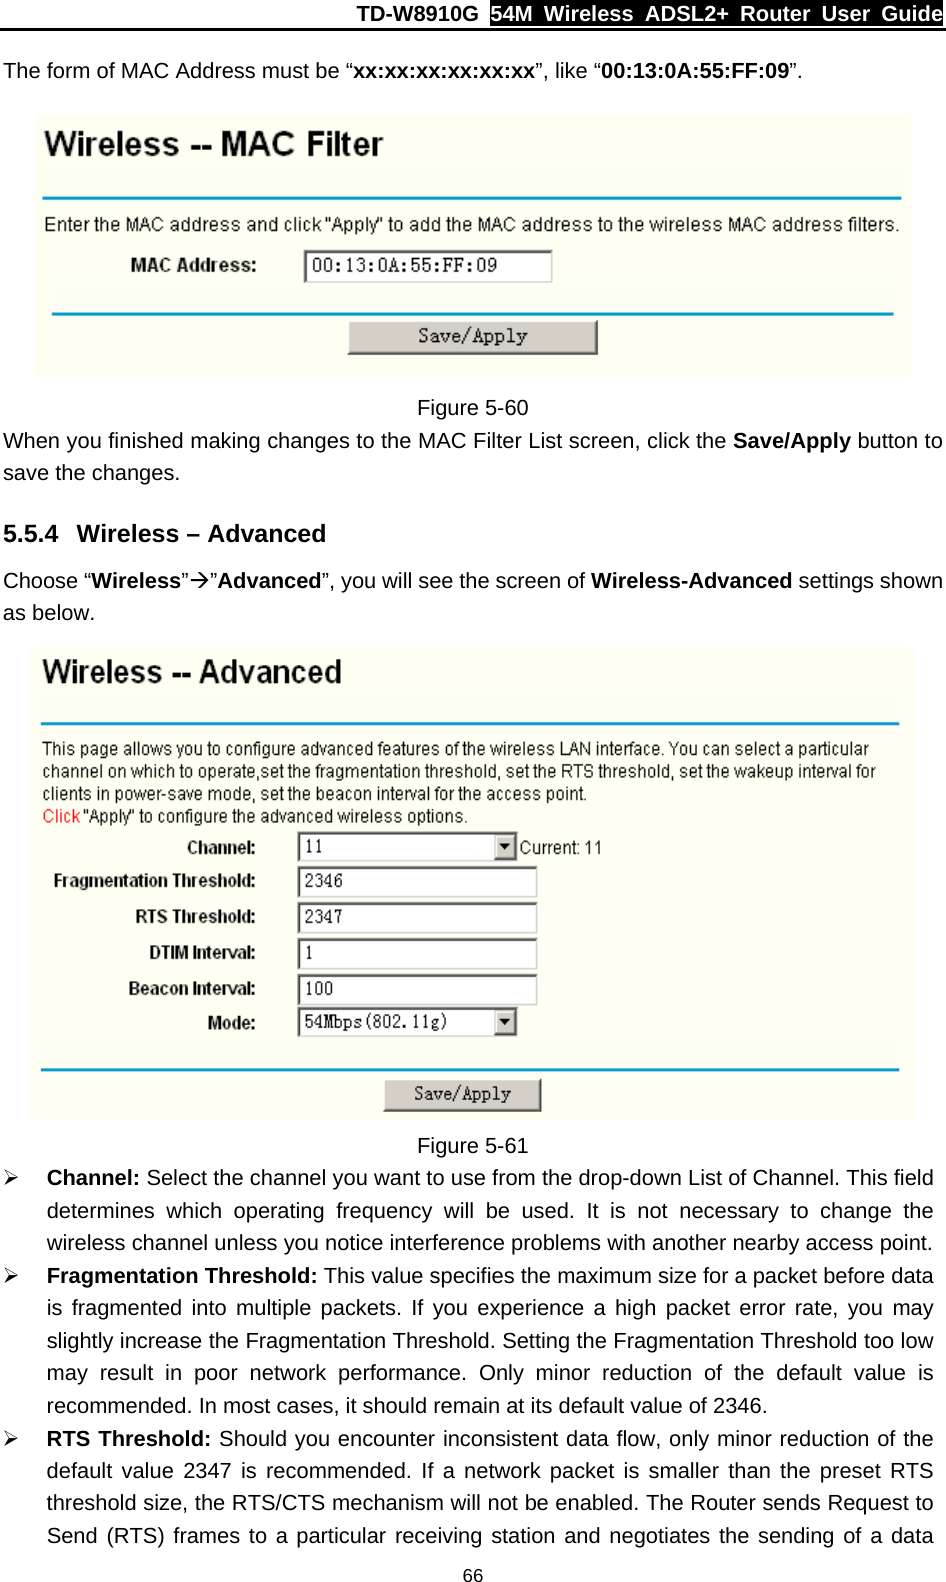 TD-W8910G  54M Wireless ADSL2+ Router User Guide  66The form of MAC Address must be “xx:xx:xx:xx:xx:xx”, like “00:13:0A:55:FF:09”.  Figure 5-60 When you finished making changes to the MAC Filter List screen, click the Save/Apply button to save the changes. 5.5.4  Wireless – Advanced Choose “Wireless”Æ”Advanced”, you will see the screen of Wireless-Advanced settings shown as below.  Figure 5-61 ¾ Channel: Select the channel you want to use from the drop-down List of Channel. This field determines which operating frequency will be used. It is not necessary to change the wireless channel unless you notice interference problems with another nearby access point. ¾ Fragmentation Threshold: This value specifies the maximum size for a packet before data is fragmented into multiple packets. If you experience a high packet error rate, you may slightly increase the Fragmentation Threshold. Setting the Fragmentation Threshold too low may result in poor network performance. Only minor reduction of the default value is recommended. In most cases, it should remain at its default value of 2346. ¾ RTS Threshold: Should you encounter inconsistent data flow, only minor reduction of the default value 2347 is recommended. If a network packet is smaller than the preset RTS threshold size, the RTS/CTS mechanism will not be enabled. The Router sends Request to Send (RTS) frames to a particular receiving station and negotiates the sending of a data 